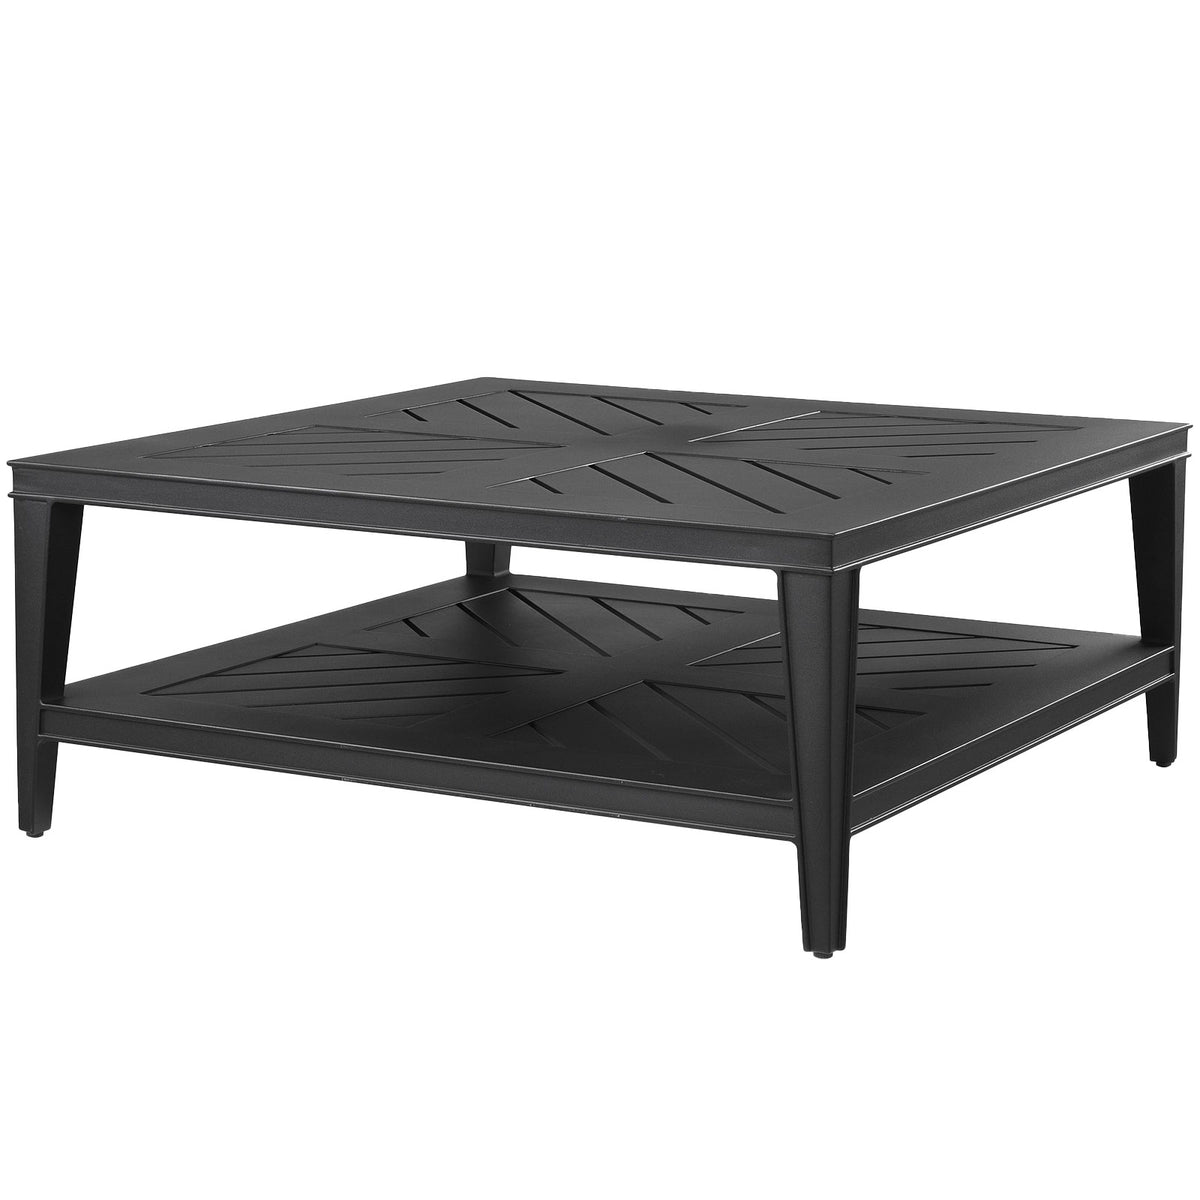 Bell Rive Square Outdoor Coffee Table, Black